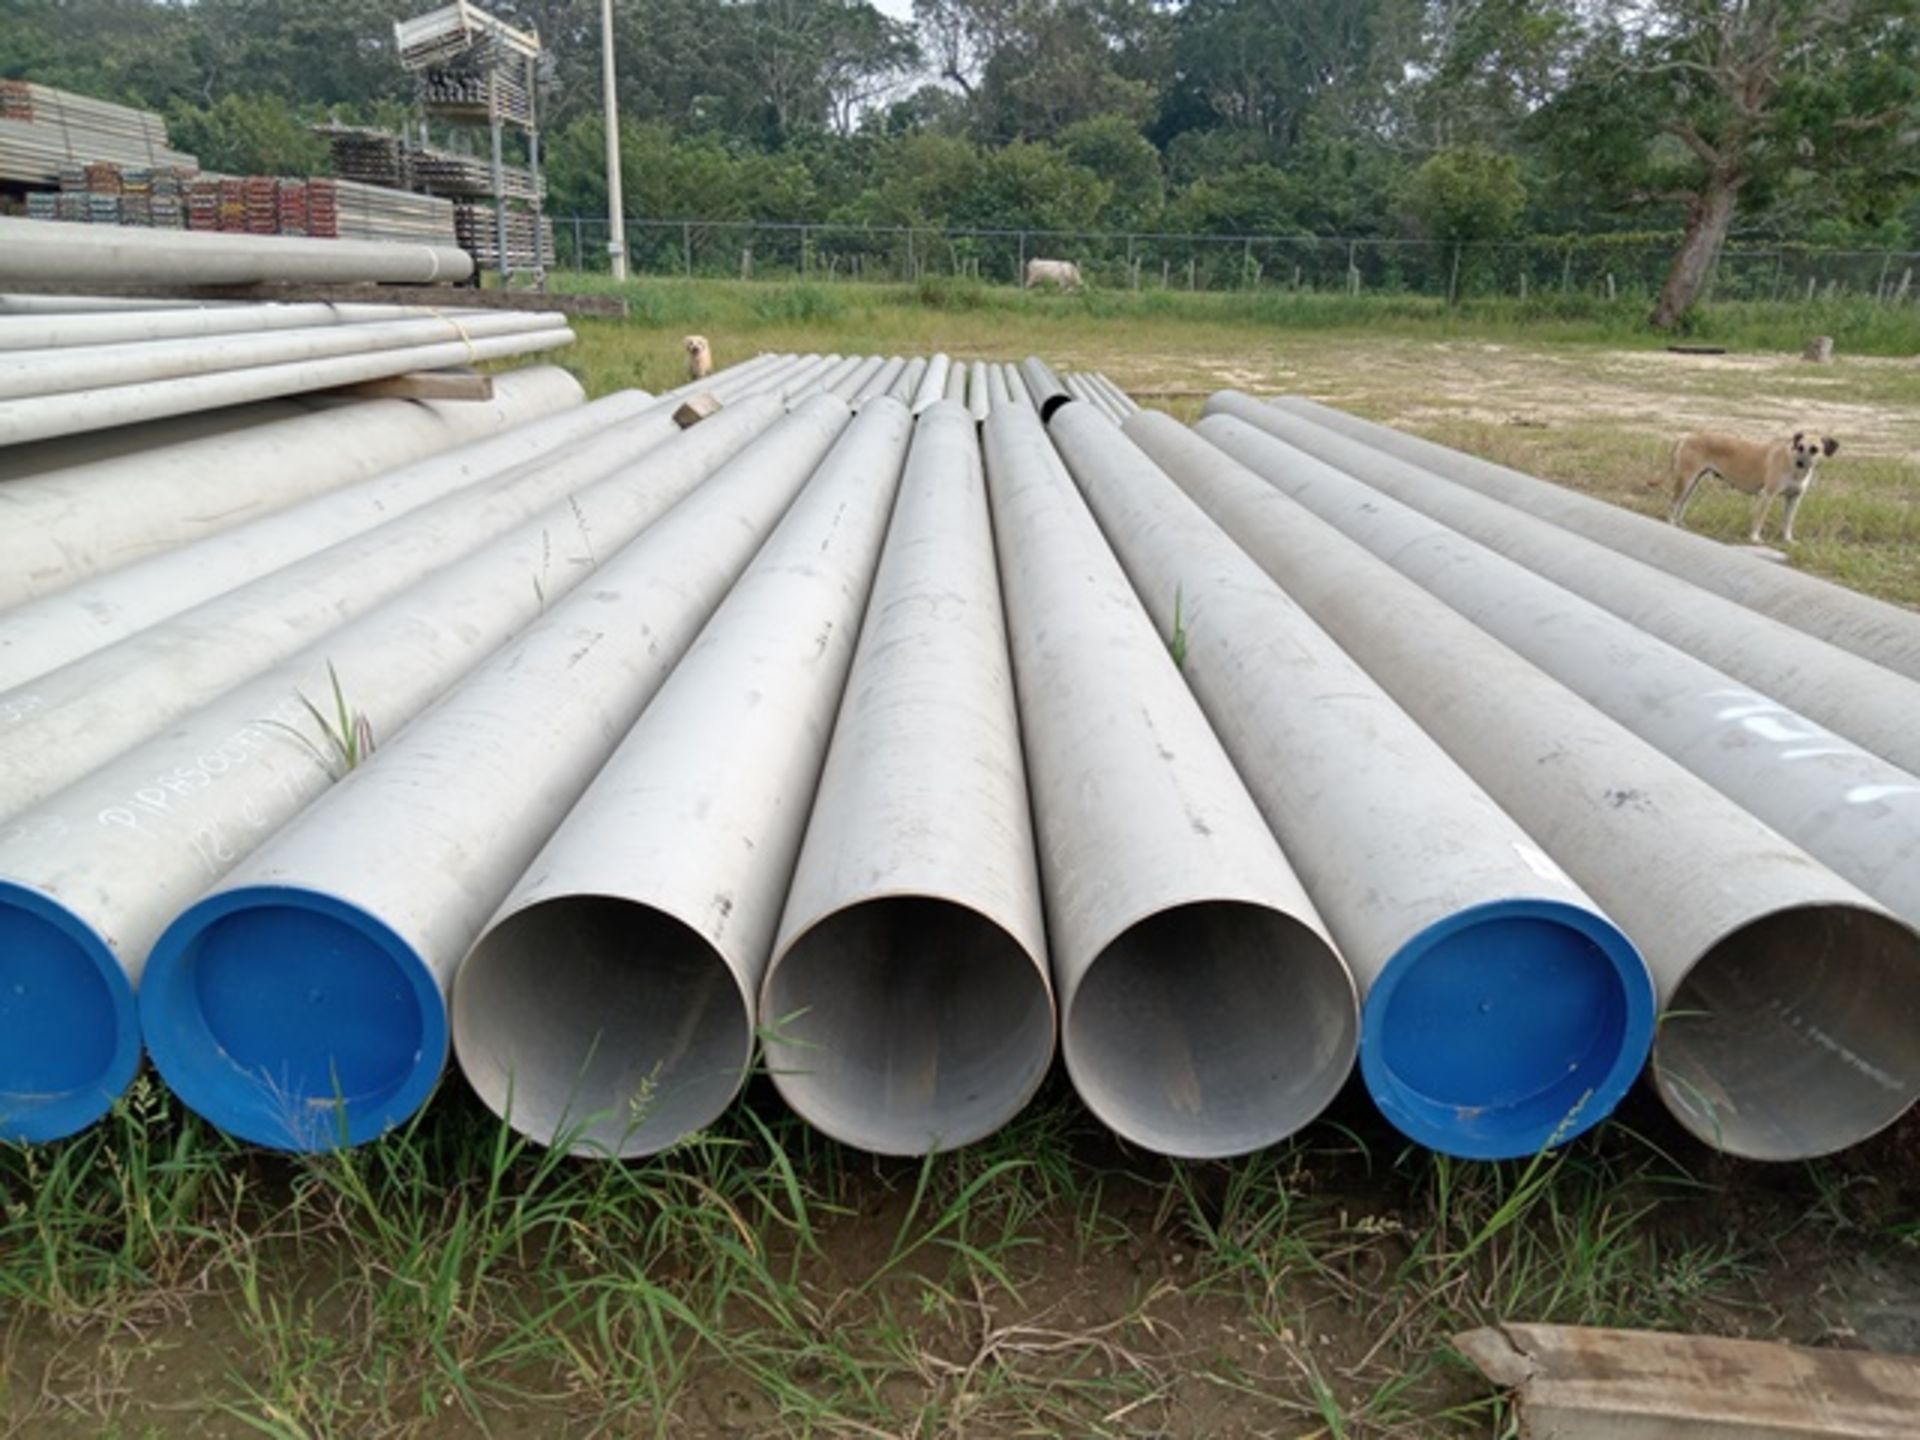 LOT OF APPROXIMATELY 133 METERS OF T-304 AND T-316 STAINLESS STEEL PIPE - Image 3 of 6